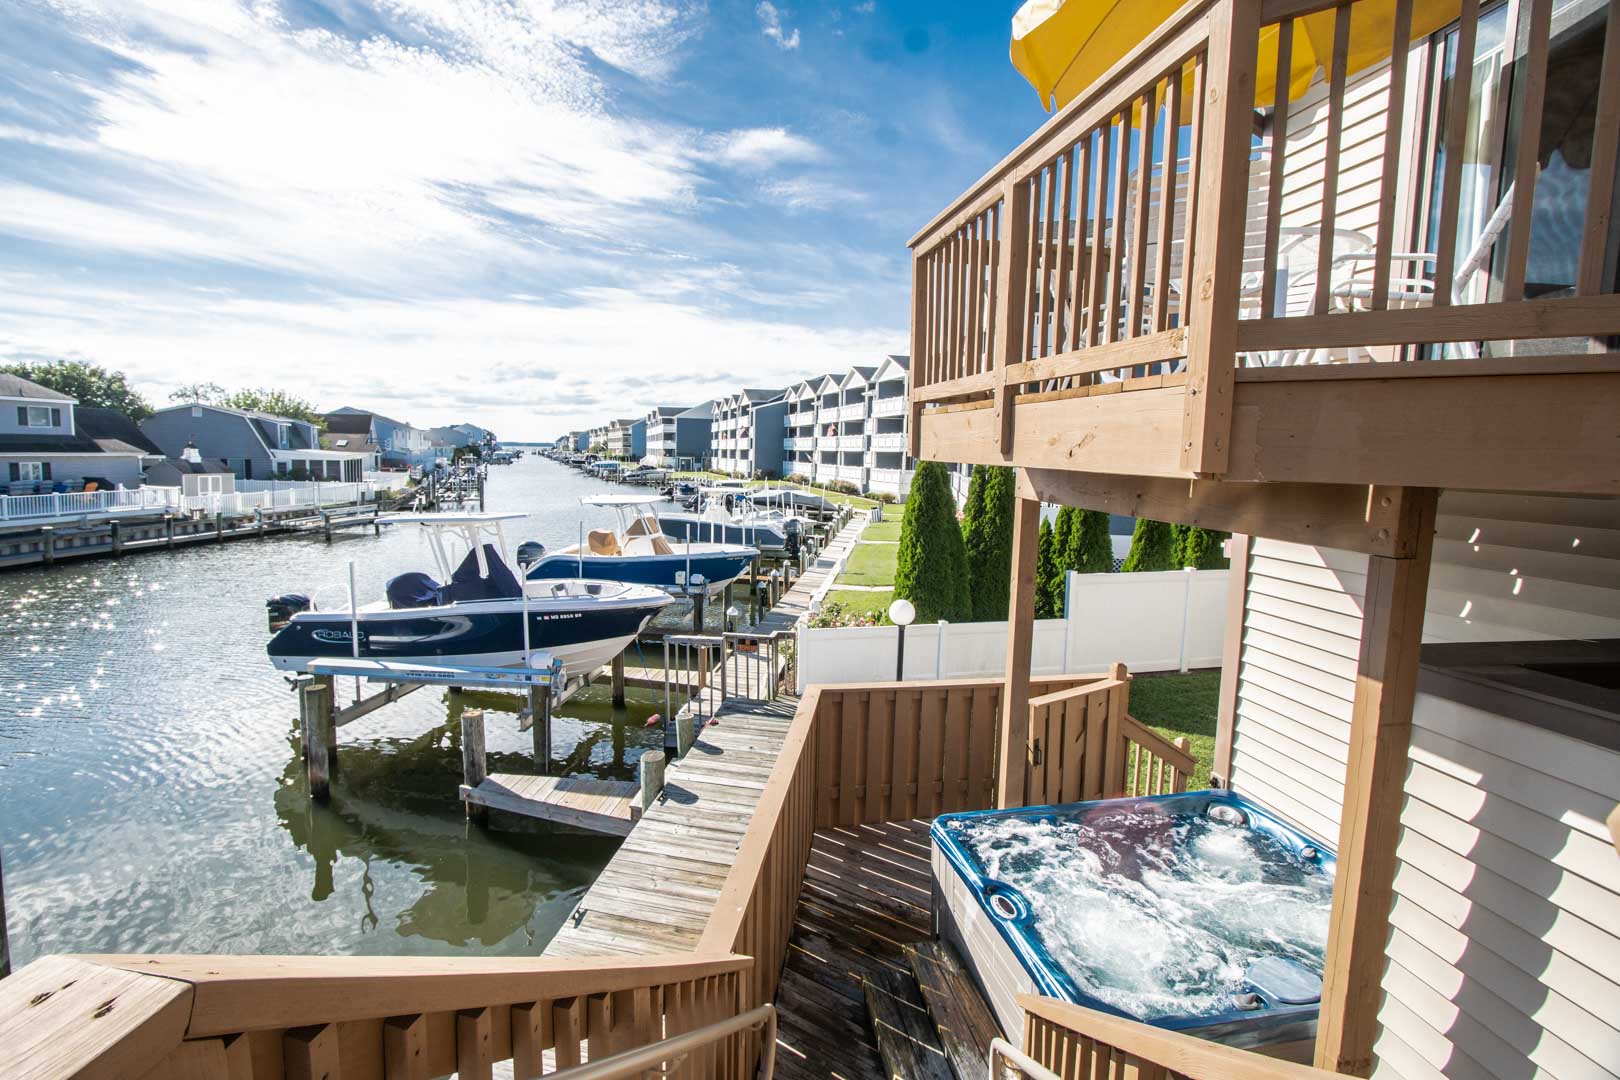 A relaxing view from the patio at VRI's Club Ocean Villas II in Ocean City, Maryland.